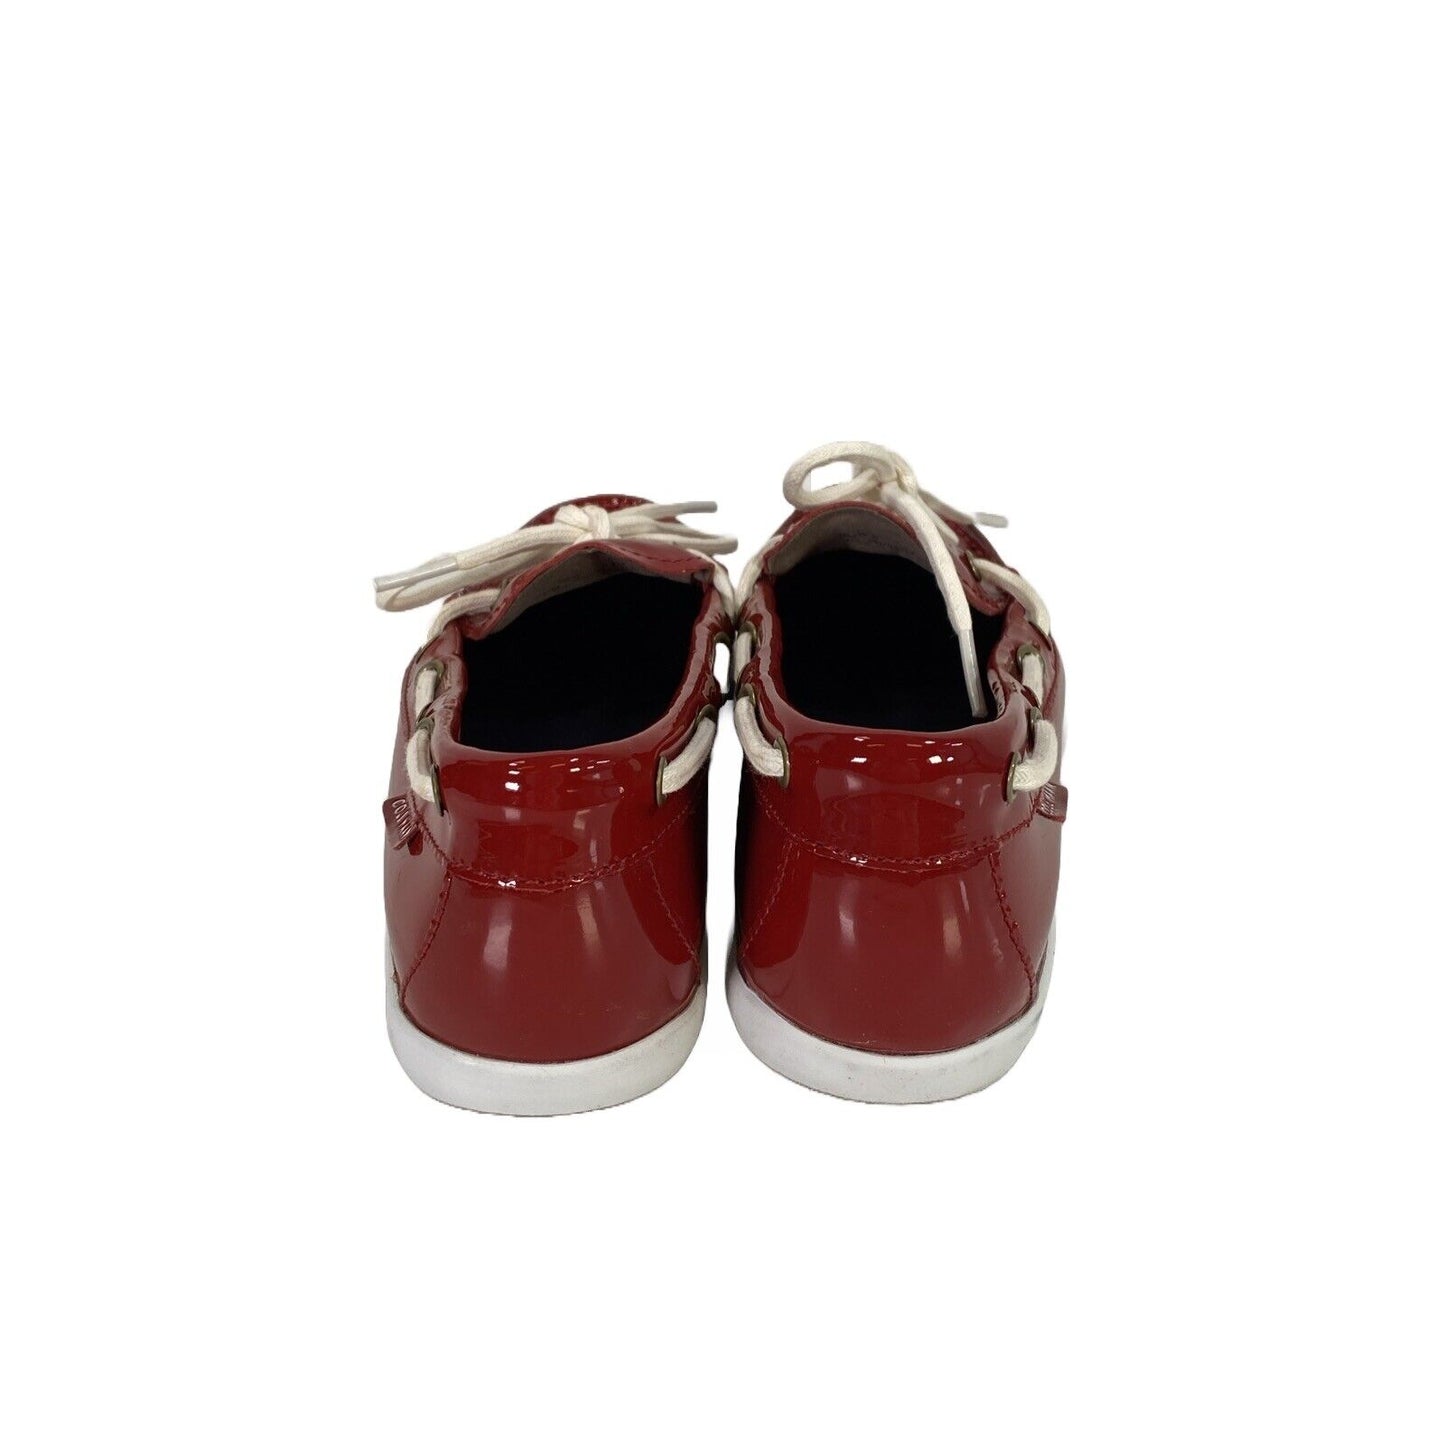 Cole Haan Women's Red Patent Leather Causal Boat Shoes - 6.5